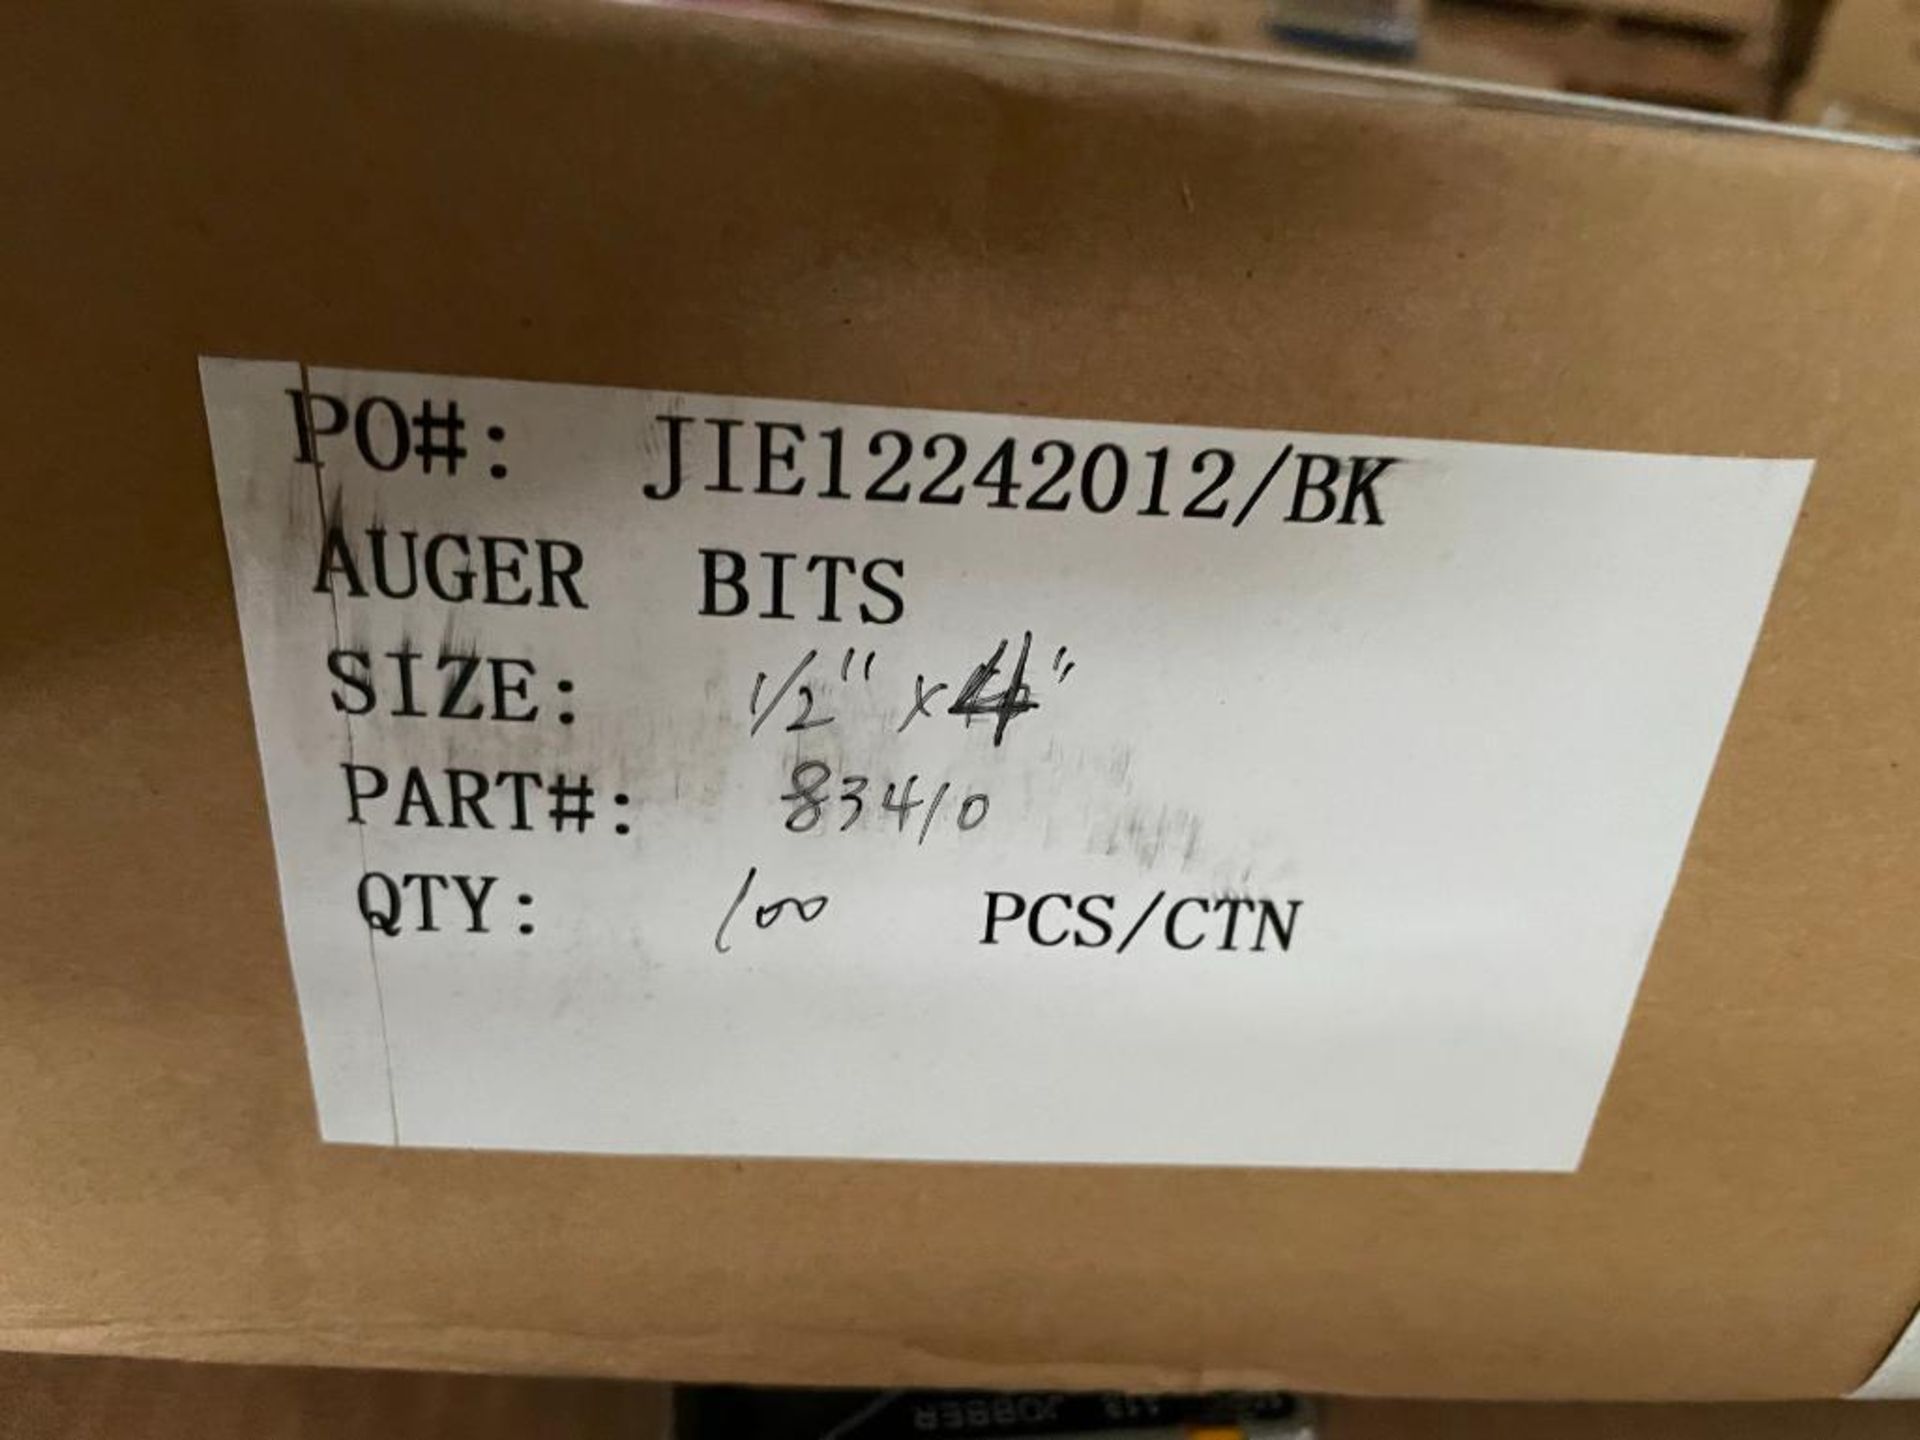 (200) 1/2" WOODWORKING AUGER BIT BRAND/MODEL EAZYPOWER 83410 ADDITIONAL INFO TOTAL LOT RETAIL PRICE: - Image 4 of 4